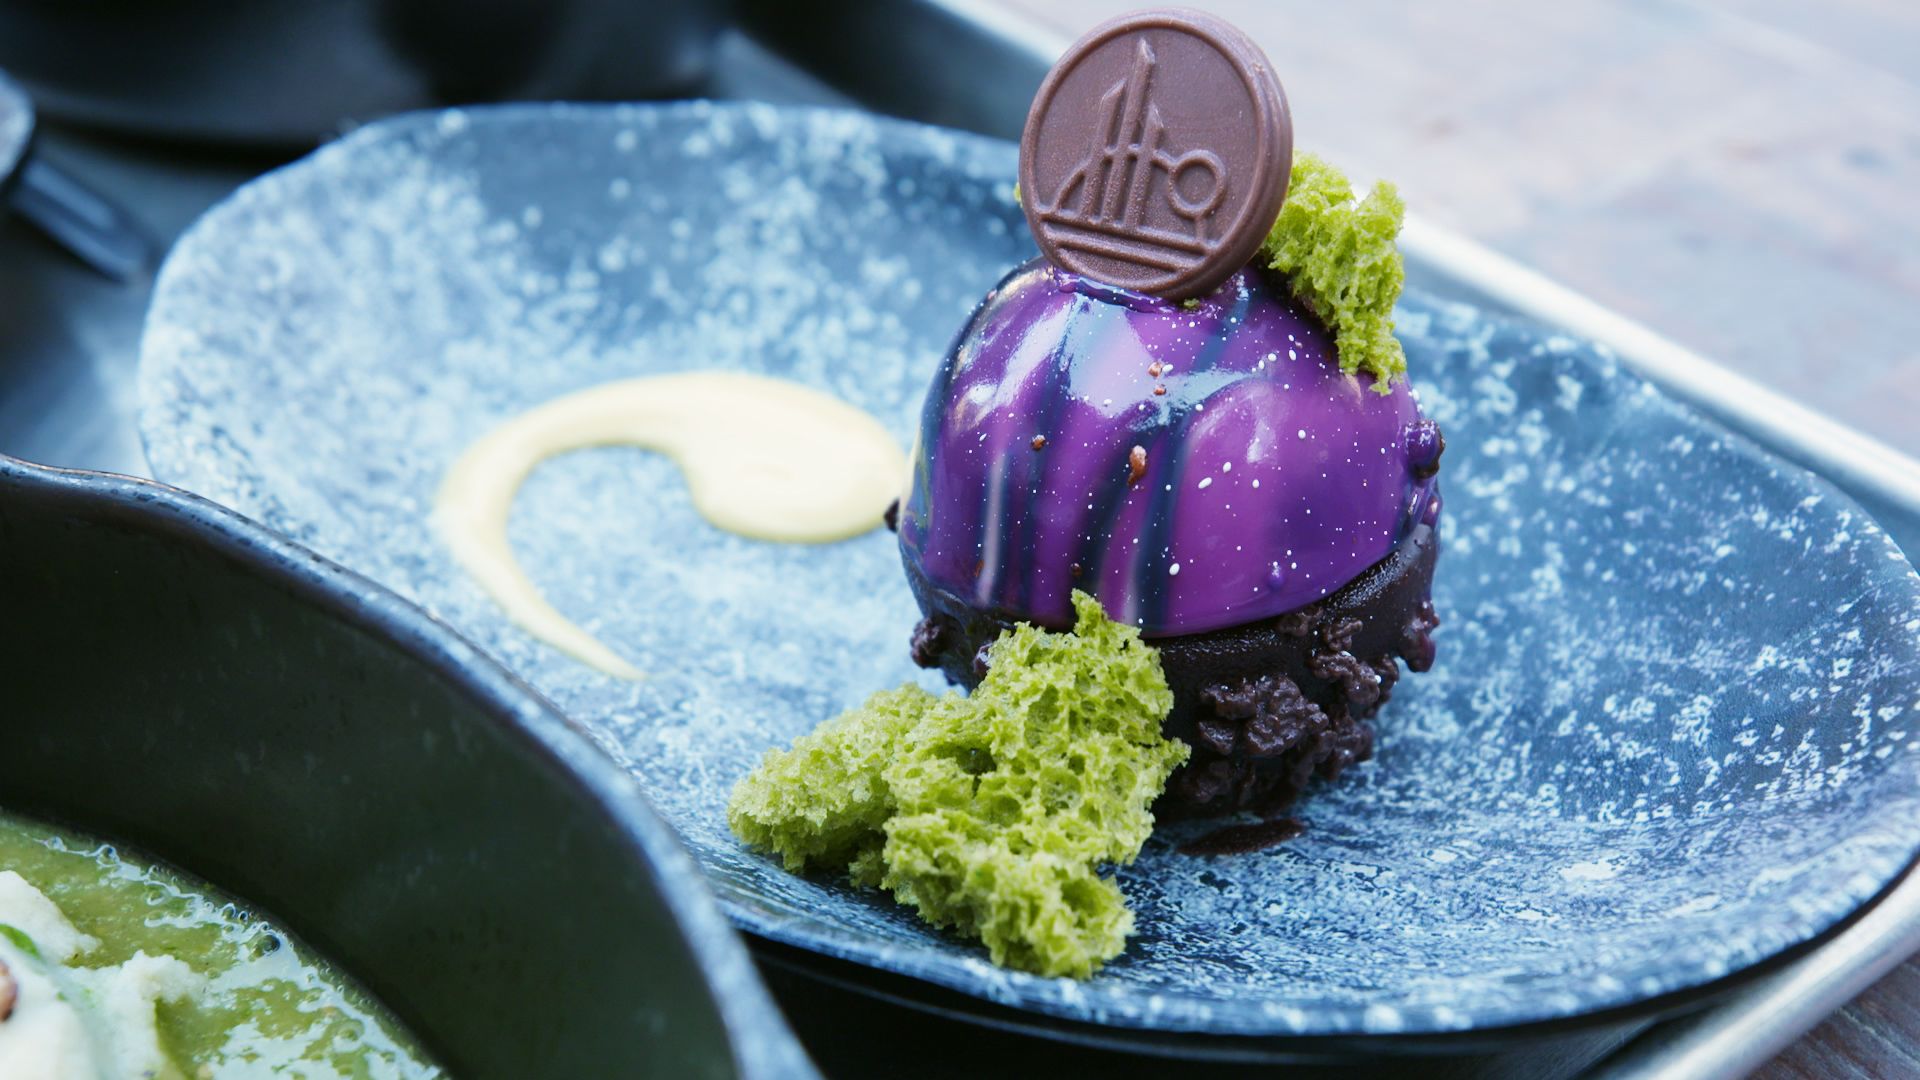 The Best Star Wars-Themed Eats in the Galaxy